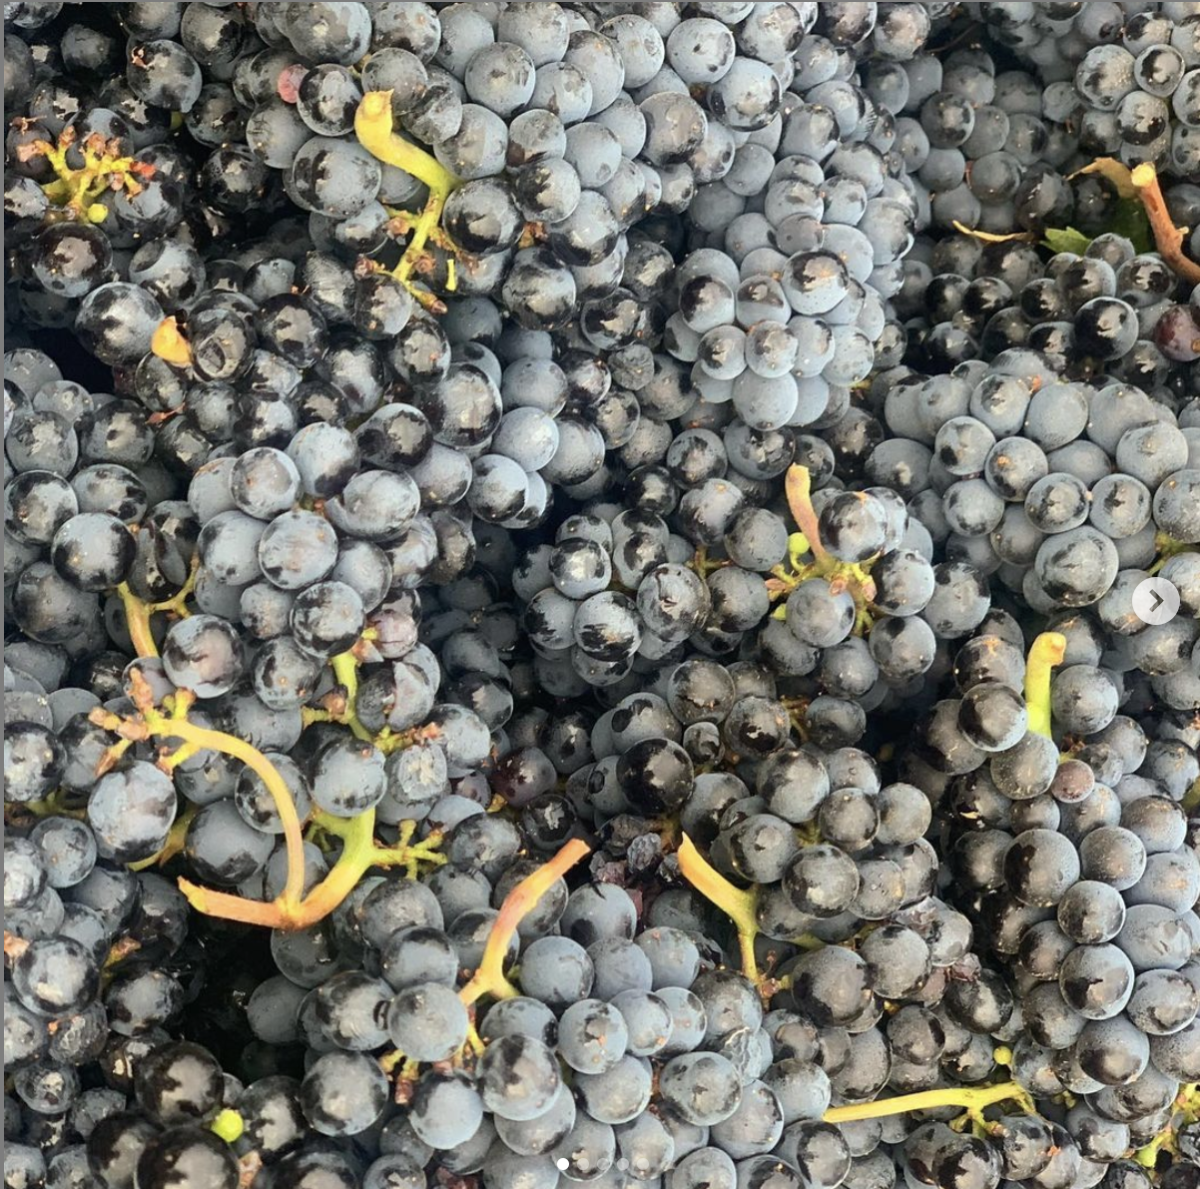 Pinot noir grapes in a bin at Anacreon Winery